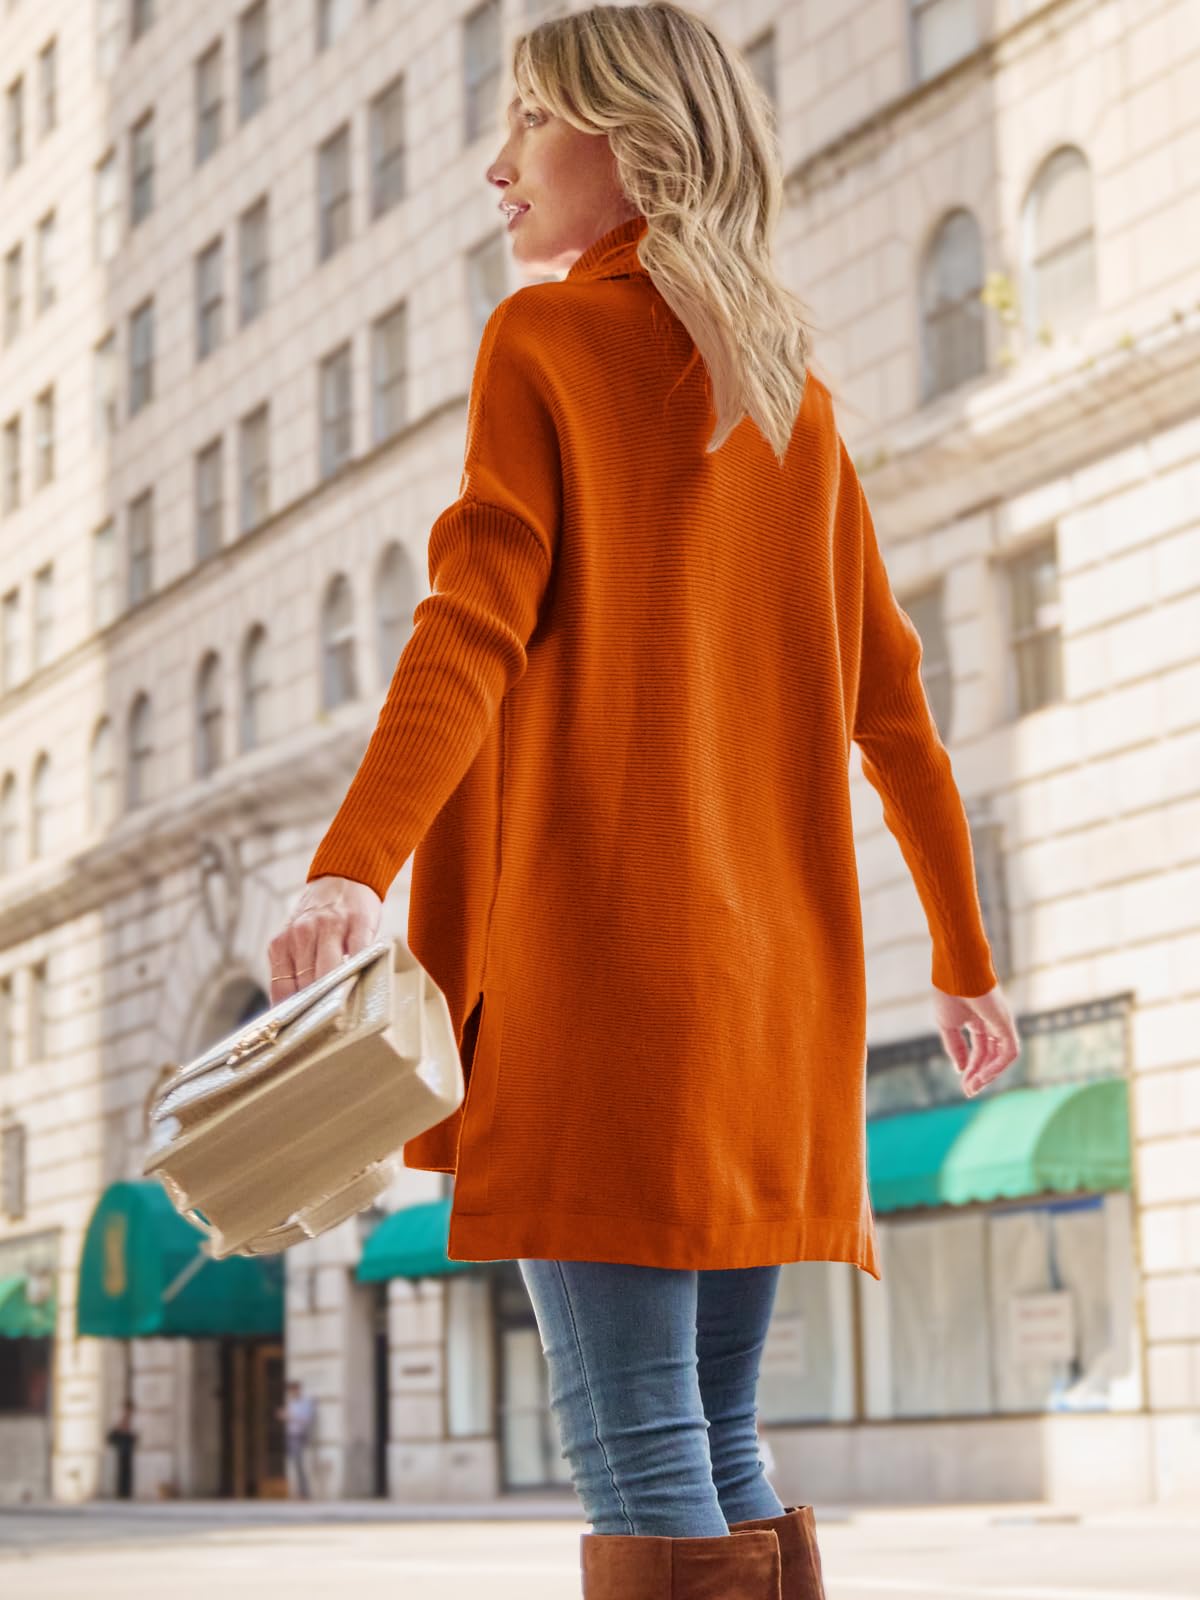 LILLUSORY Orange Turtleneck Oversized Sweaters Long Batwing Sleeve Tunic Pullover Sweater Knit Tops